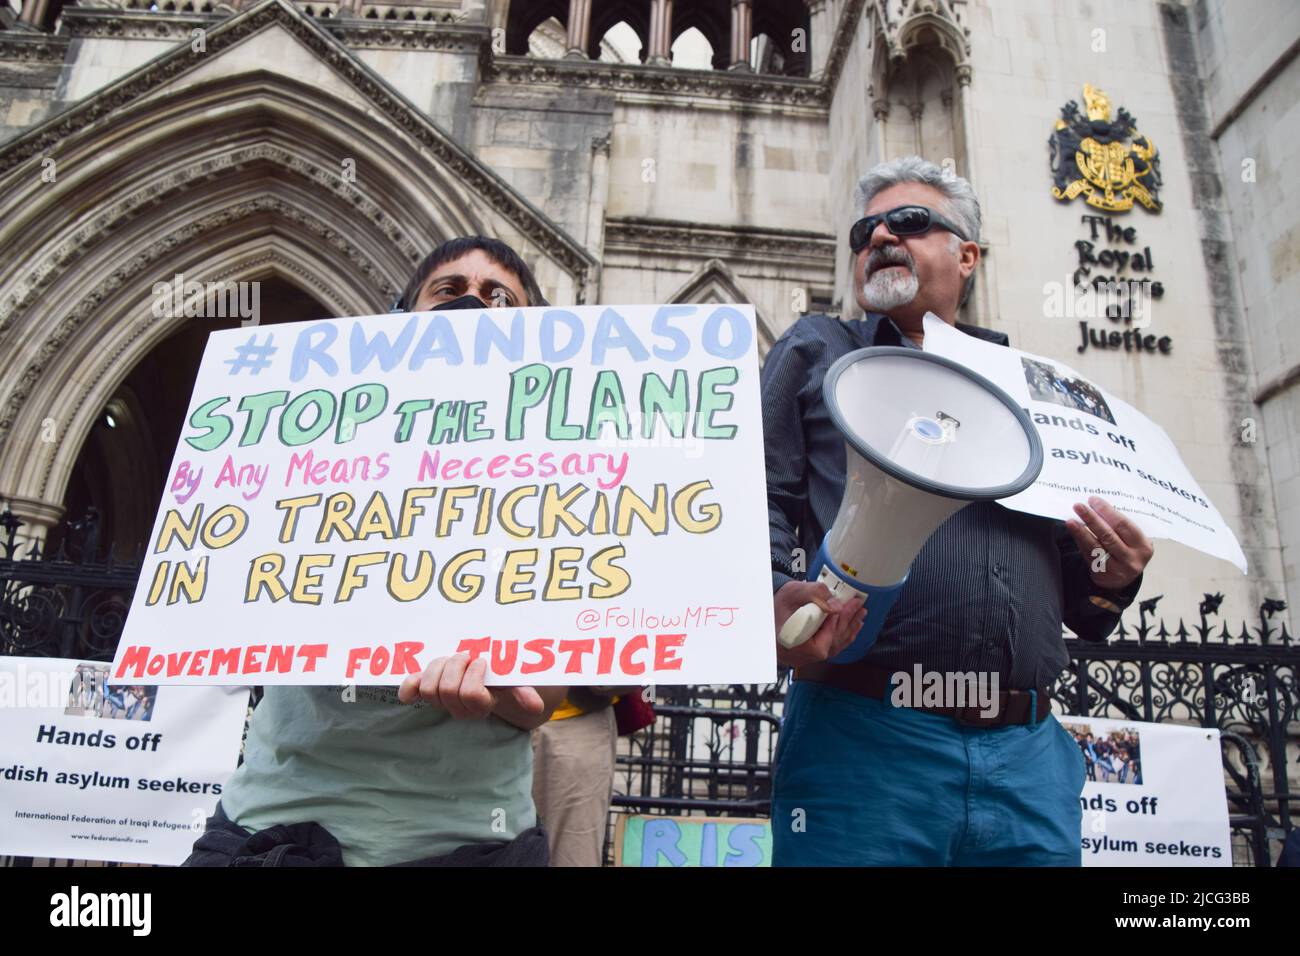 London, UK. 13th June 2022. Protesters gathered outside the Royal Courts of Justice in support of refugees as the court hears appeals to stop the flights to Rwanda. Credit: Vuk Valcic/Alamy Live News Stock Photo